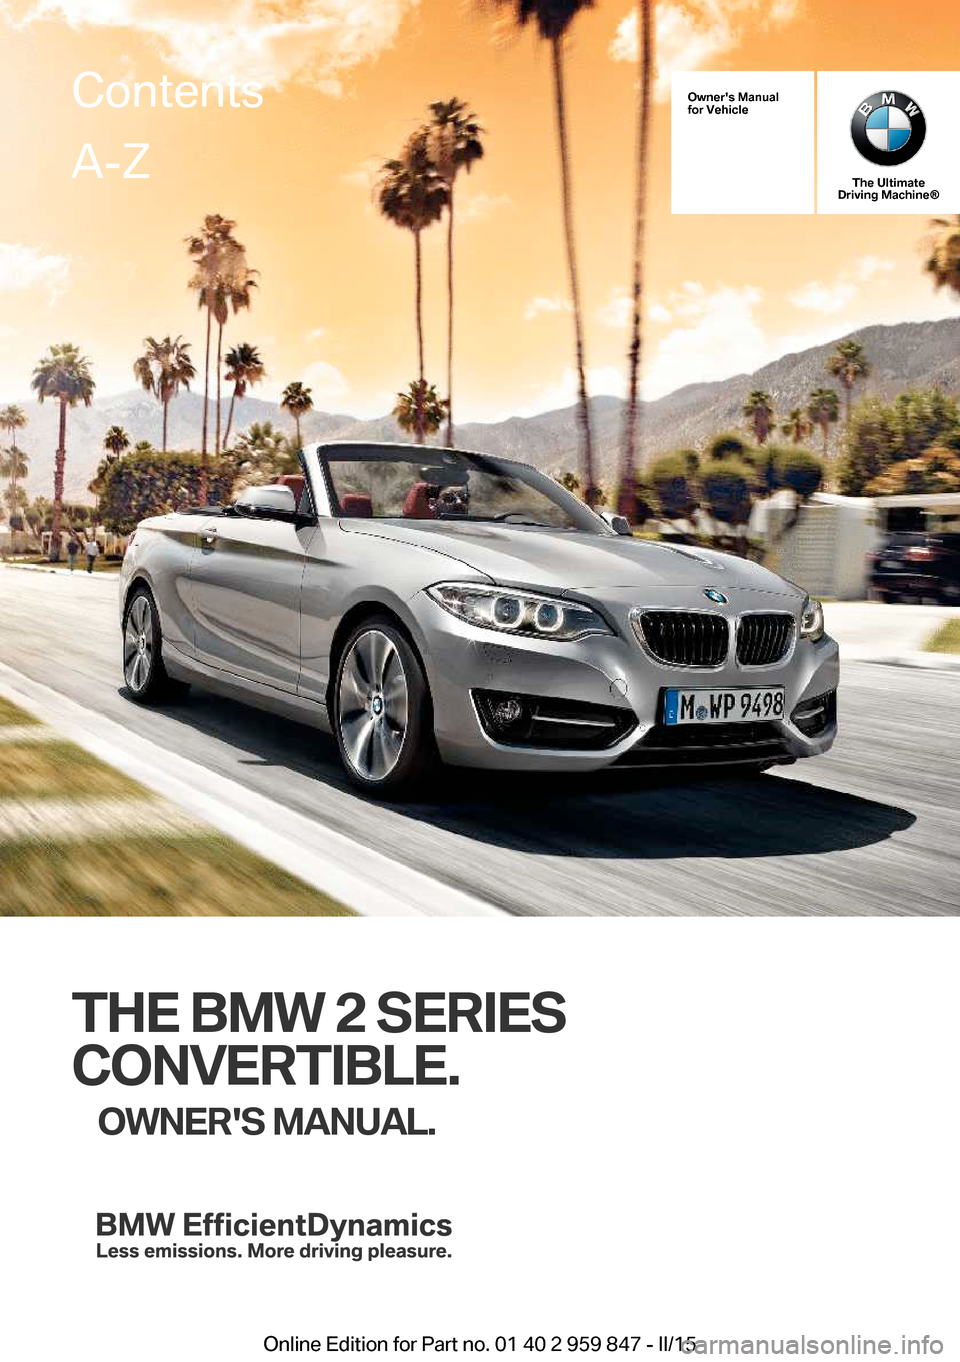 BMW 2 SERIES CONVERTIBLE 2016 F23 Owners Manual Owners Manual
for Vehicle
The Ultimate
Driving Machine®
THE BMW 2 SERIES
CONVERTIBLE. OWNERS MANUAL.
ContentsA-Z
Online Edition for Part no. 01 40 2 959 847 - II/15   